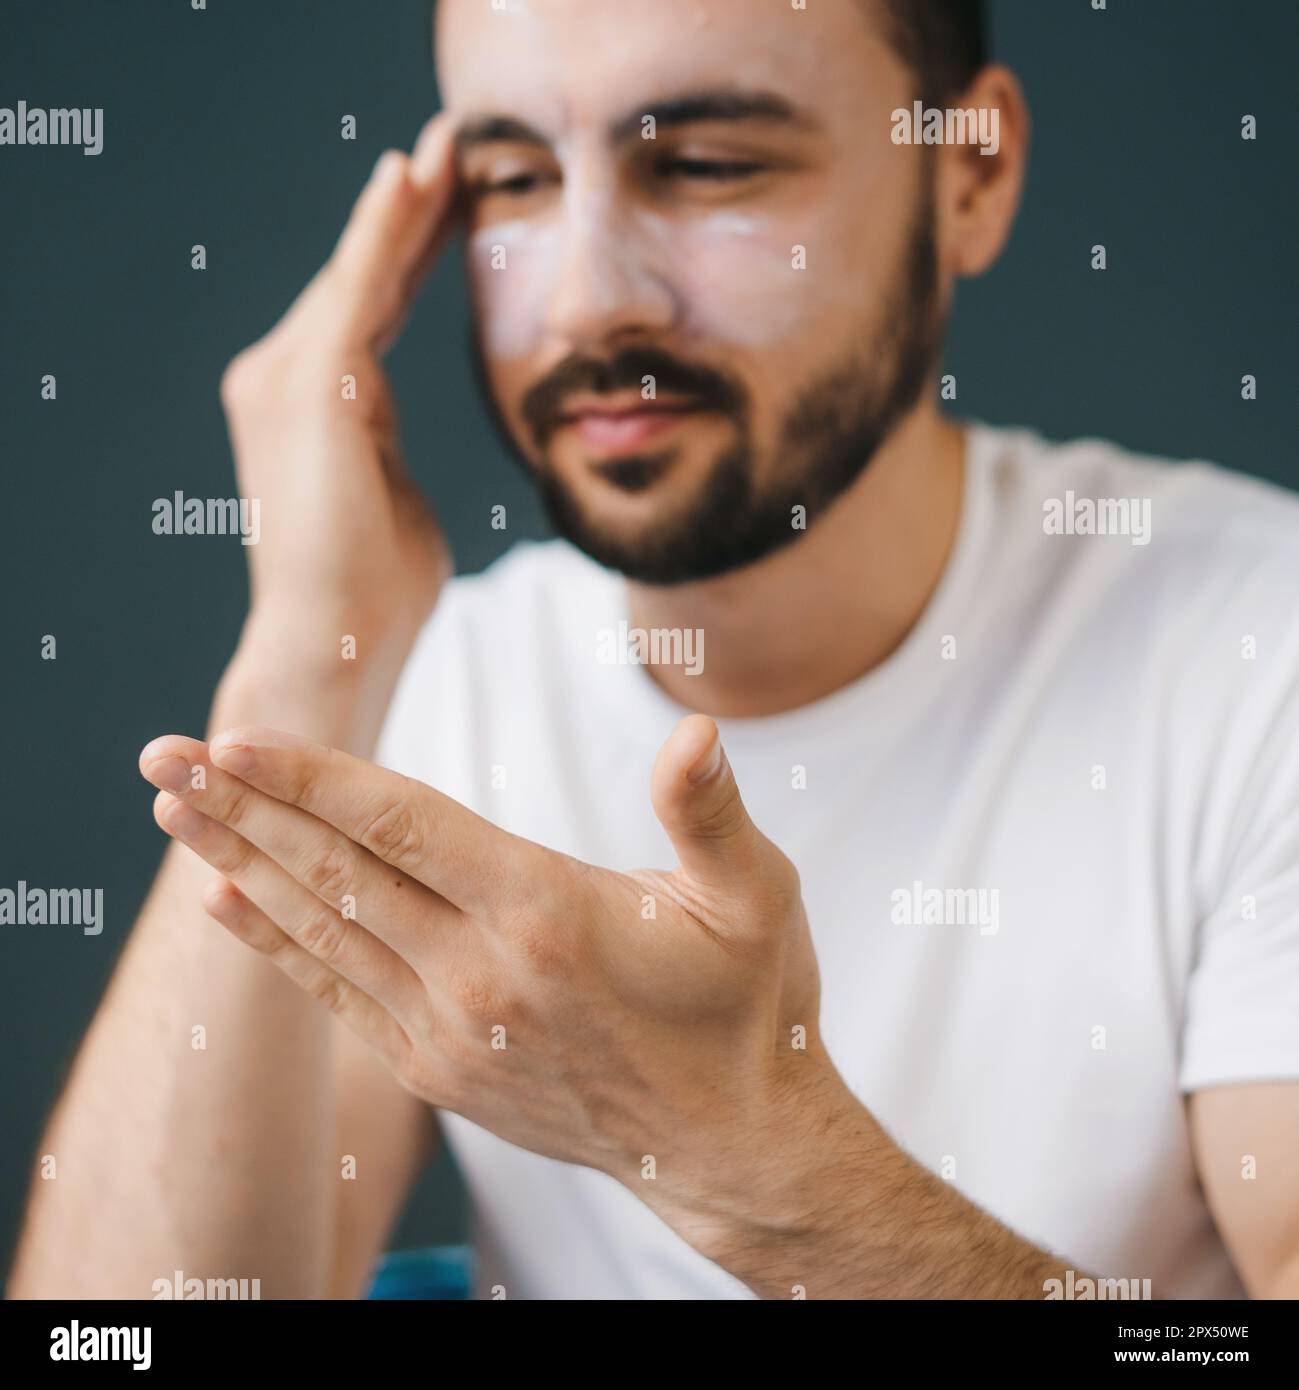 Close-up portrait of a man applying cosmetic clay face mask at home. Male appearance care, relax at home, treat yourself. Stock Photo